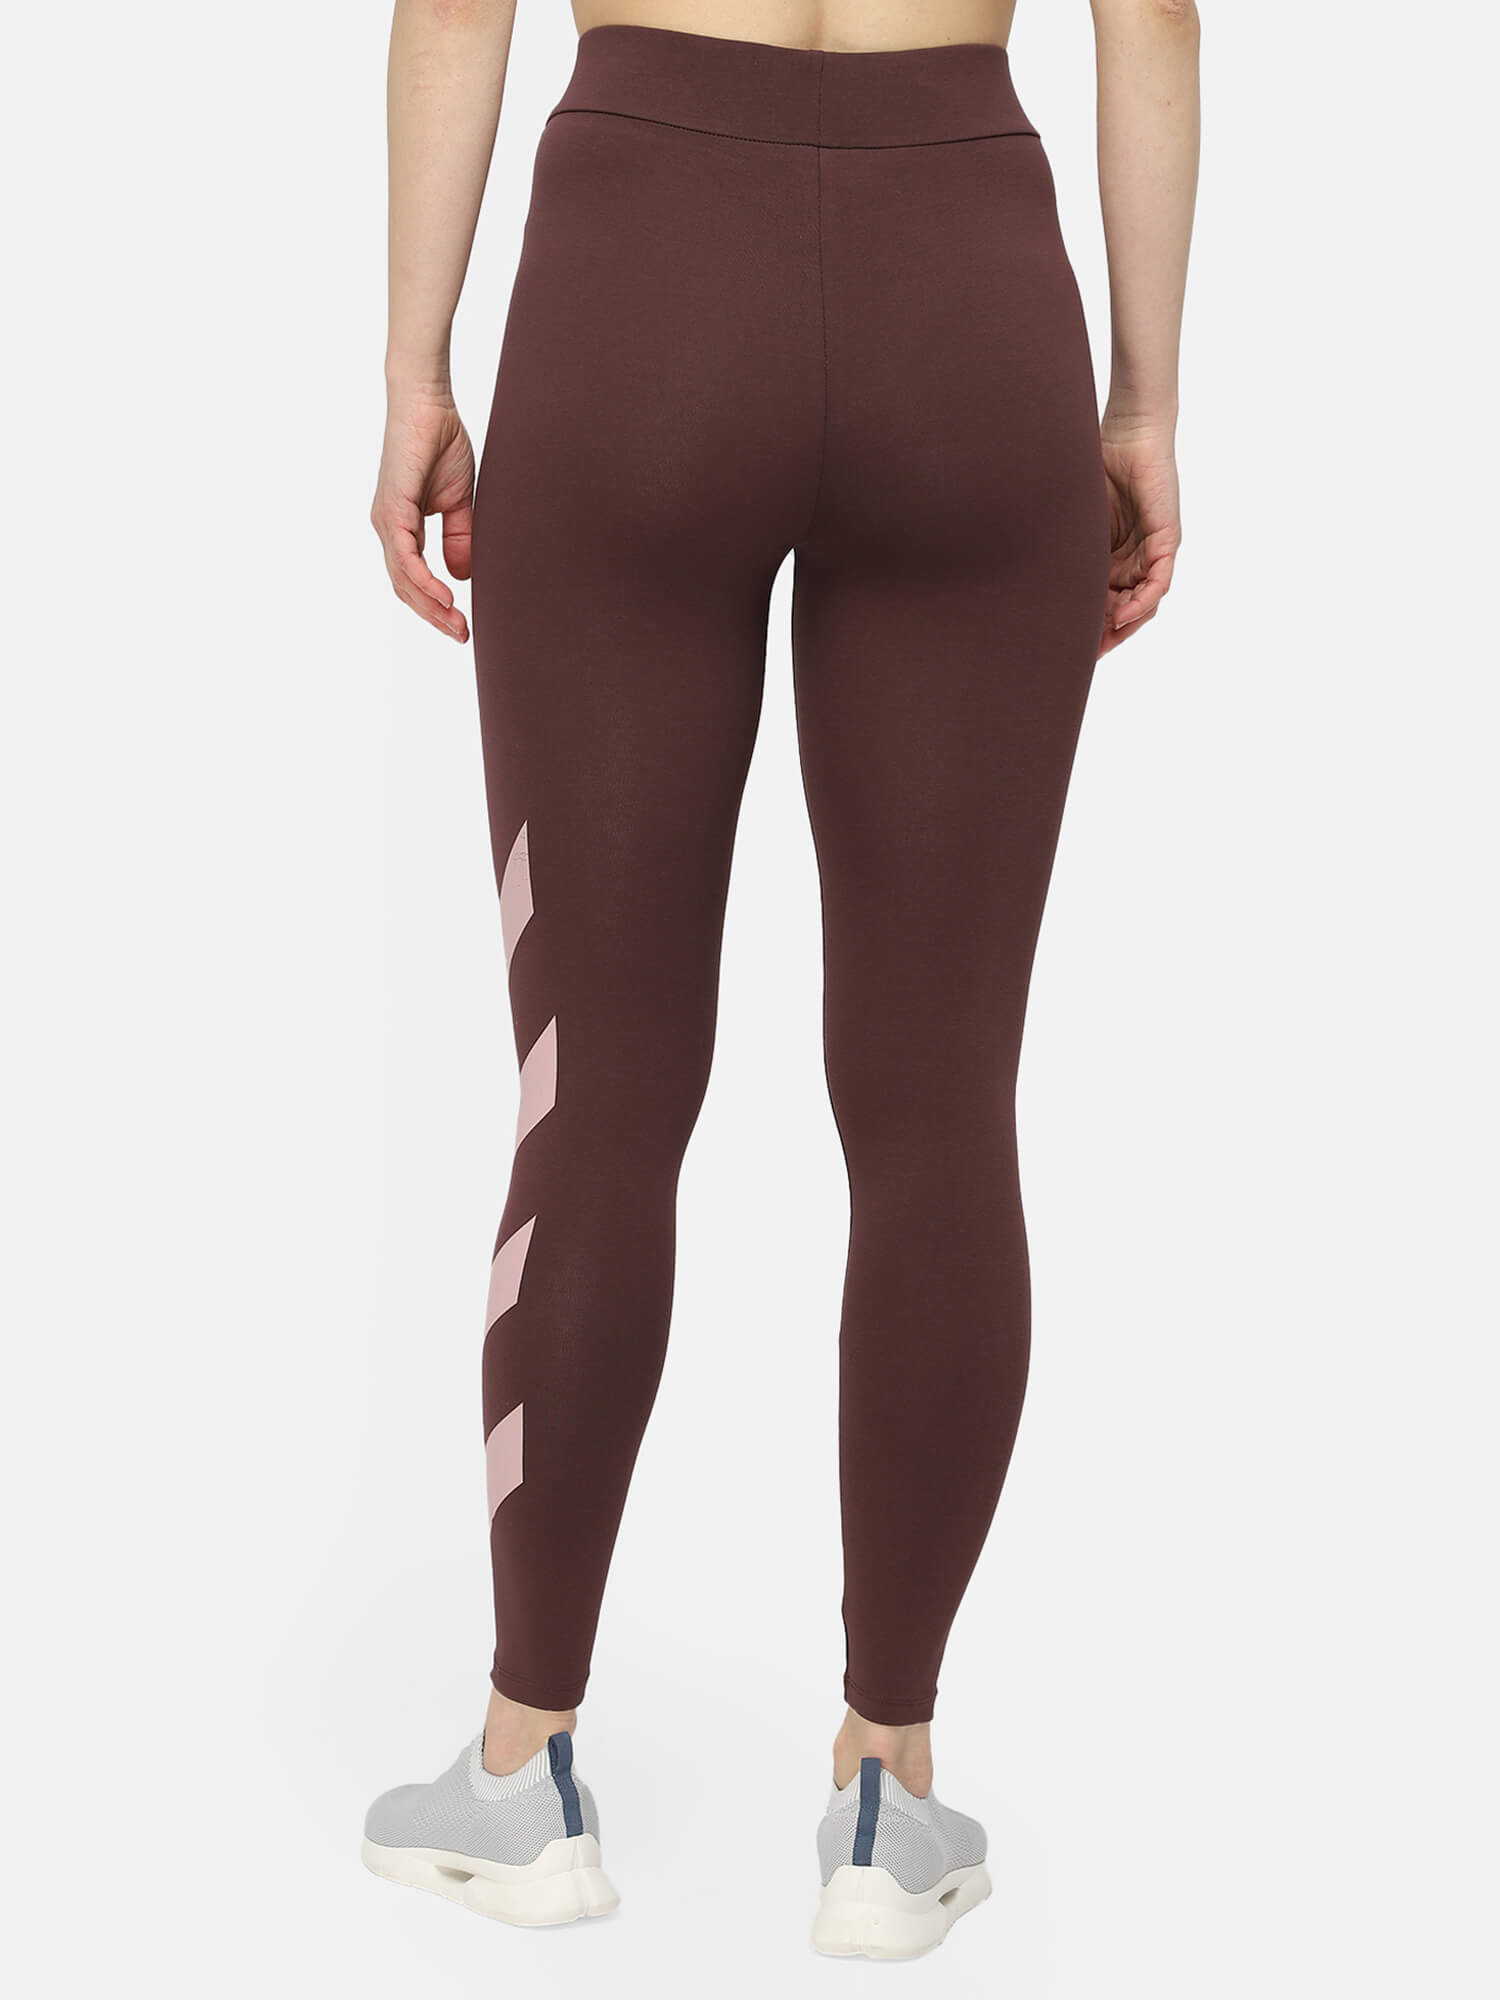 Sommer Brown Tights for Women